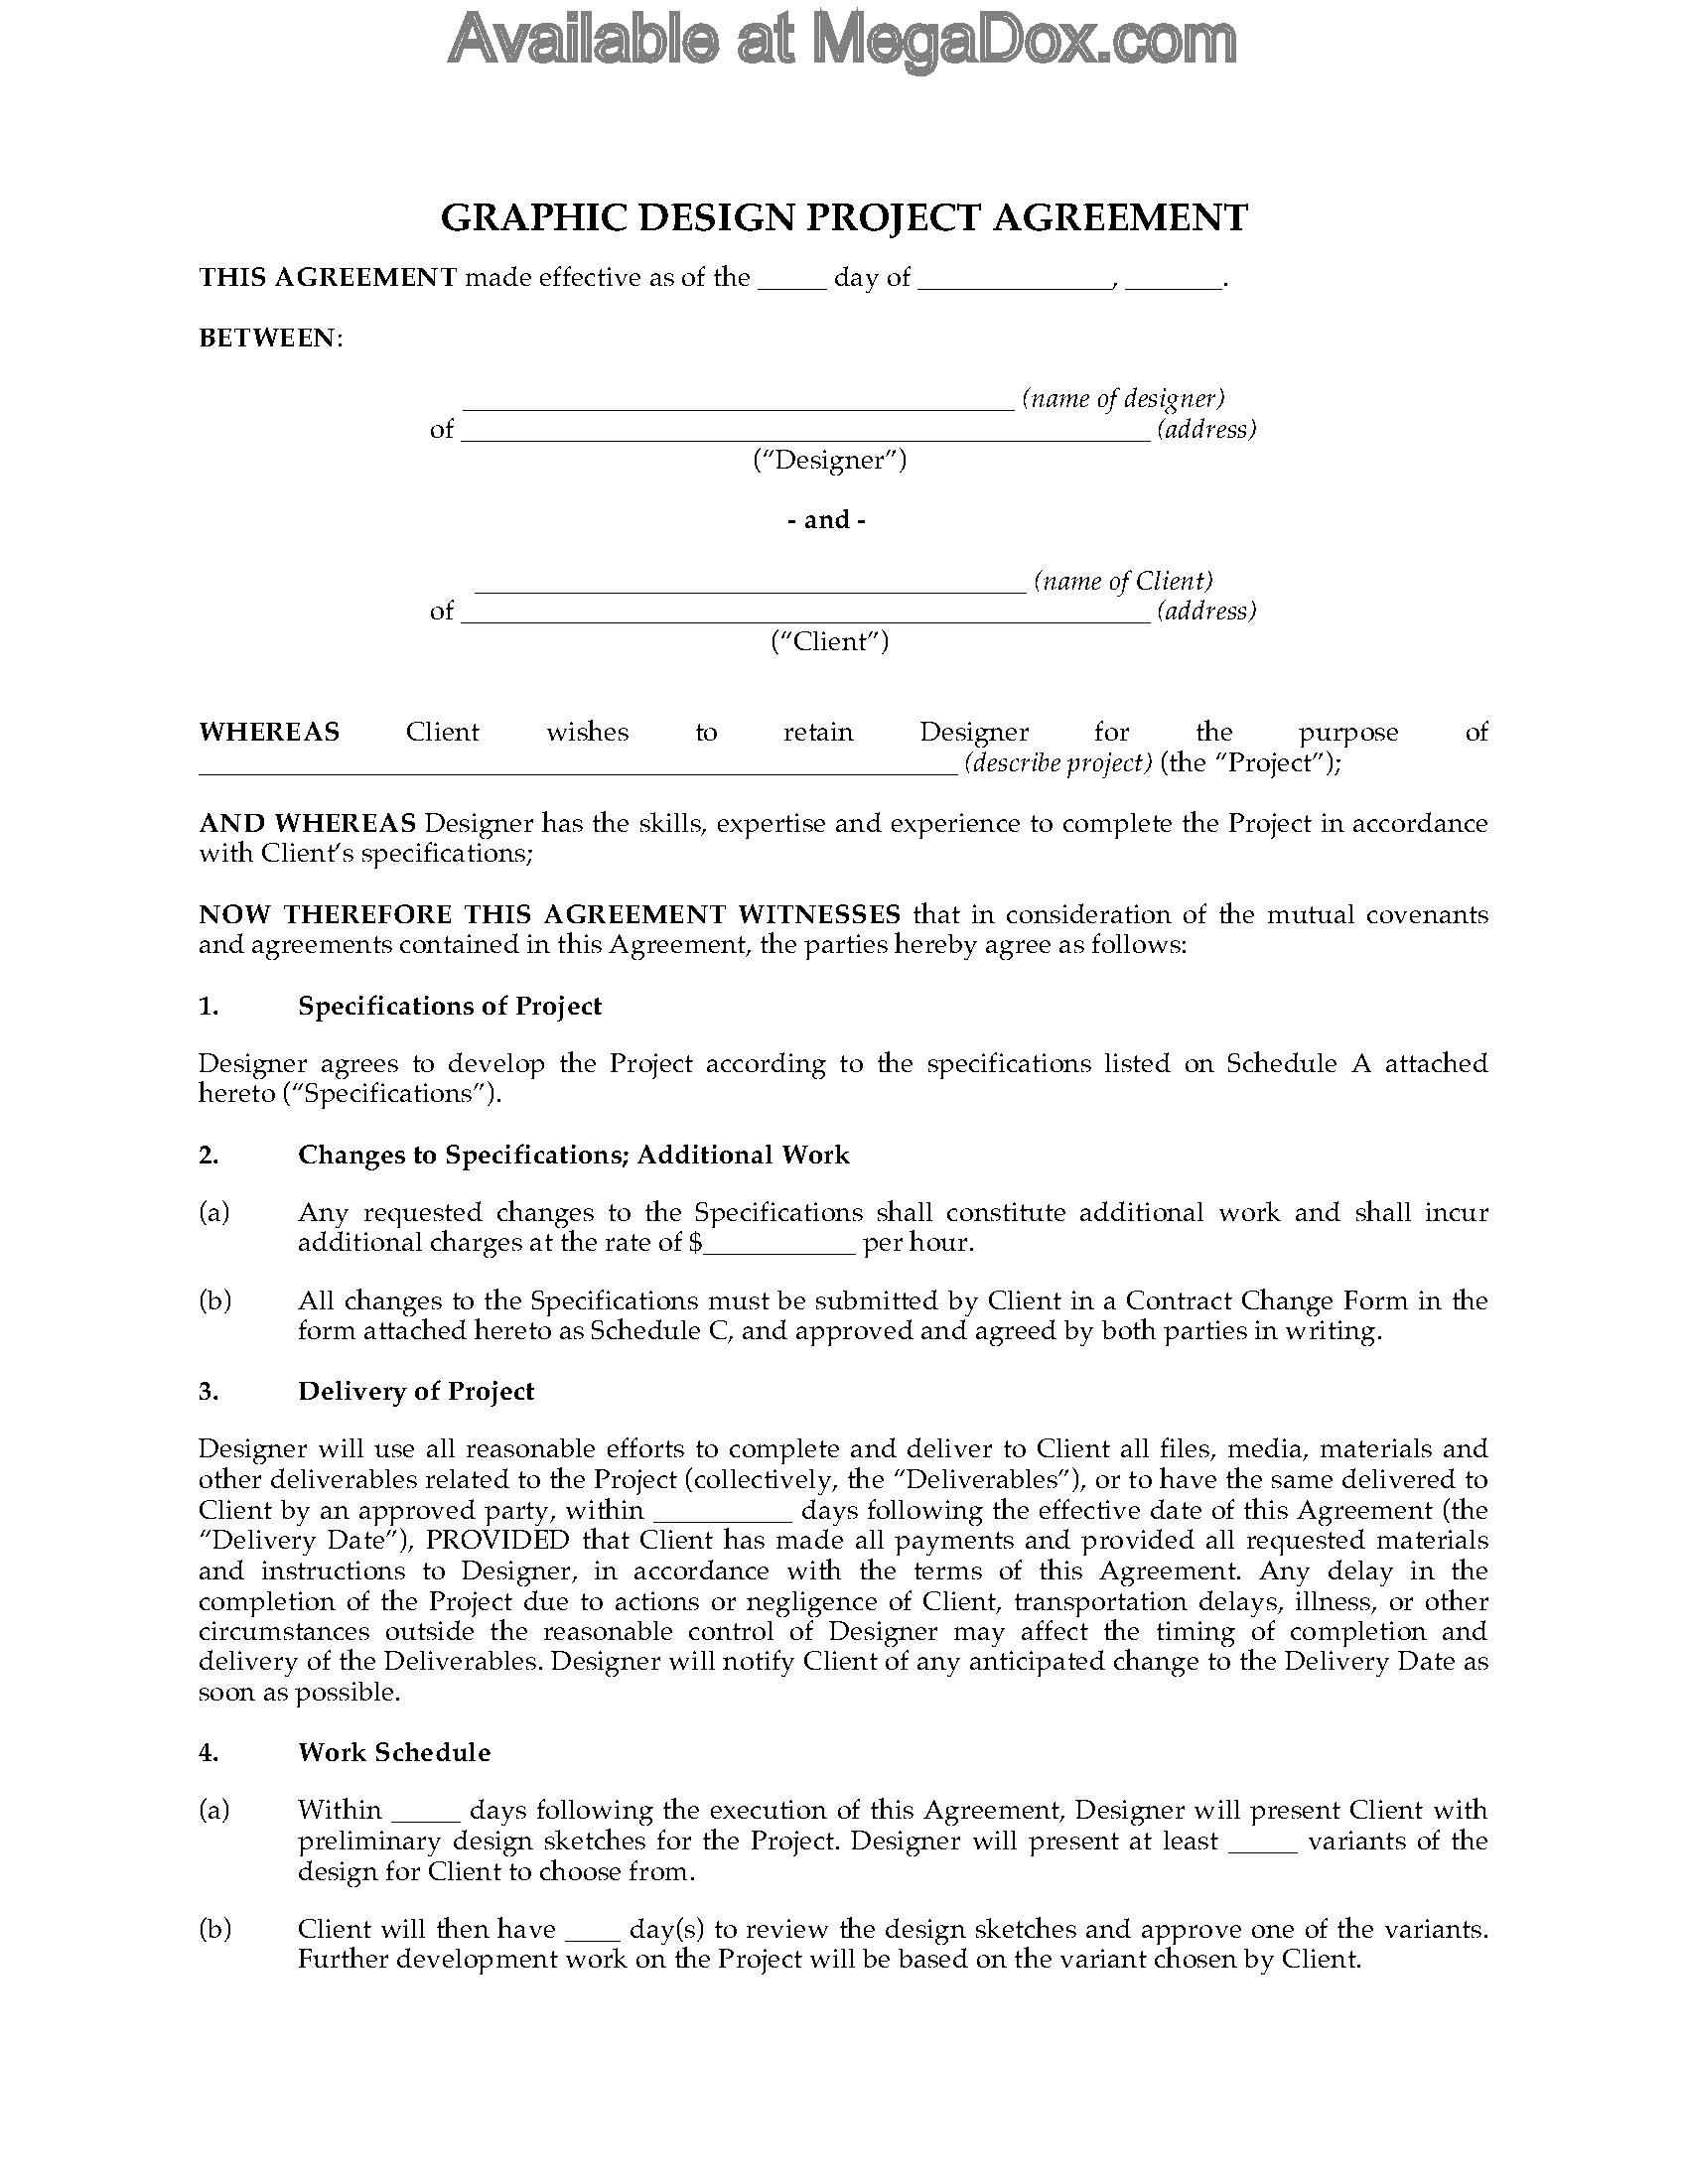 Graphic Design Project Agreement Legal Forms And Business Document Contract